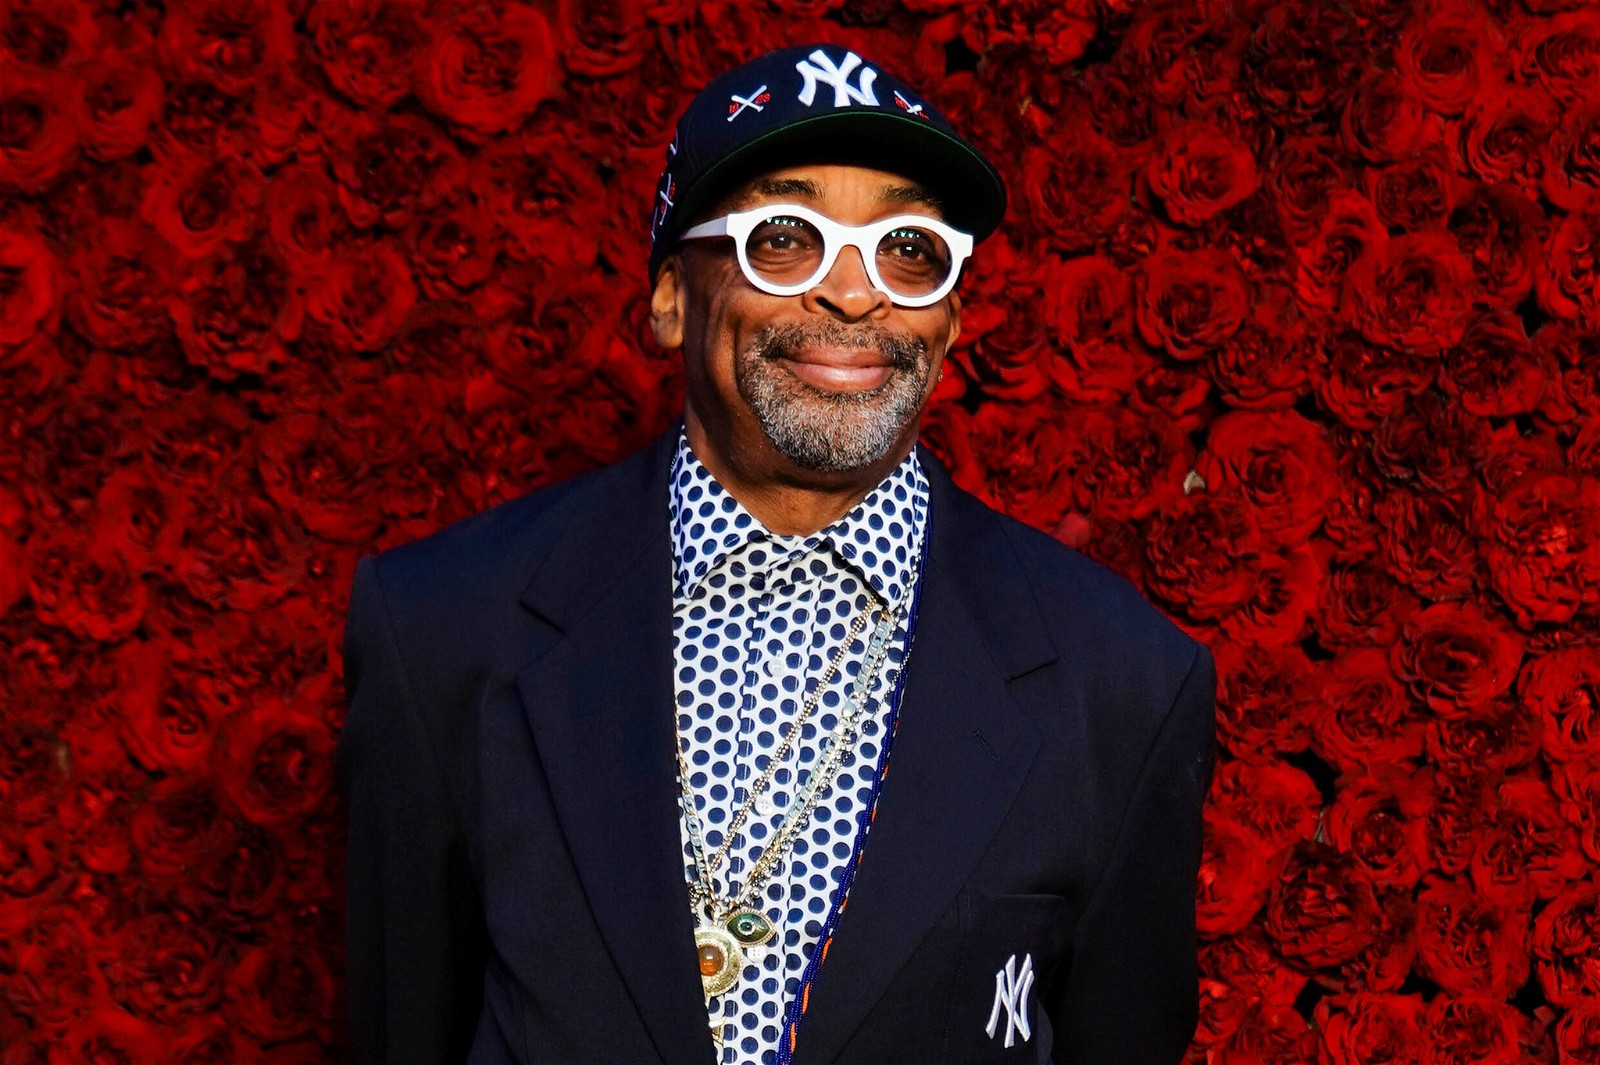 Director Spike Lee had some harsh words for Clint Eastwood.